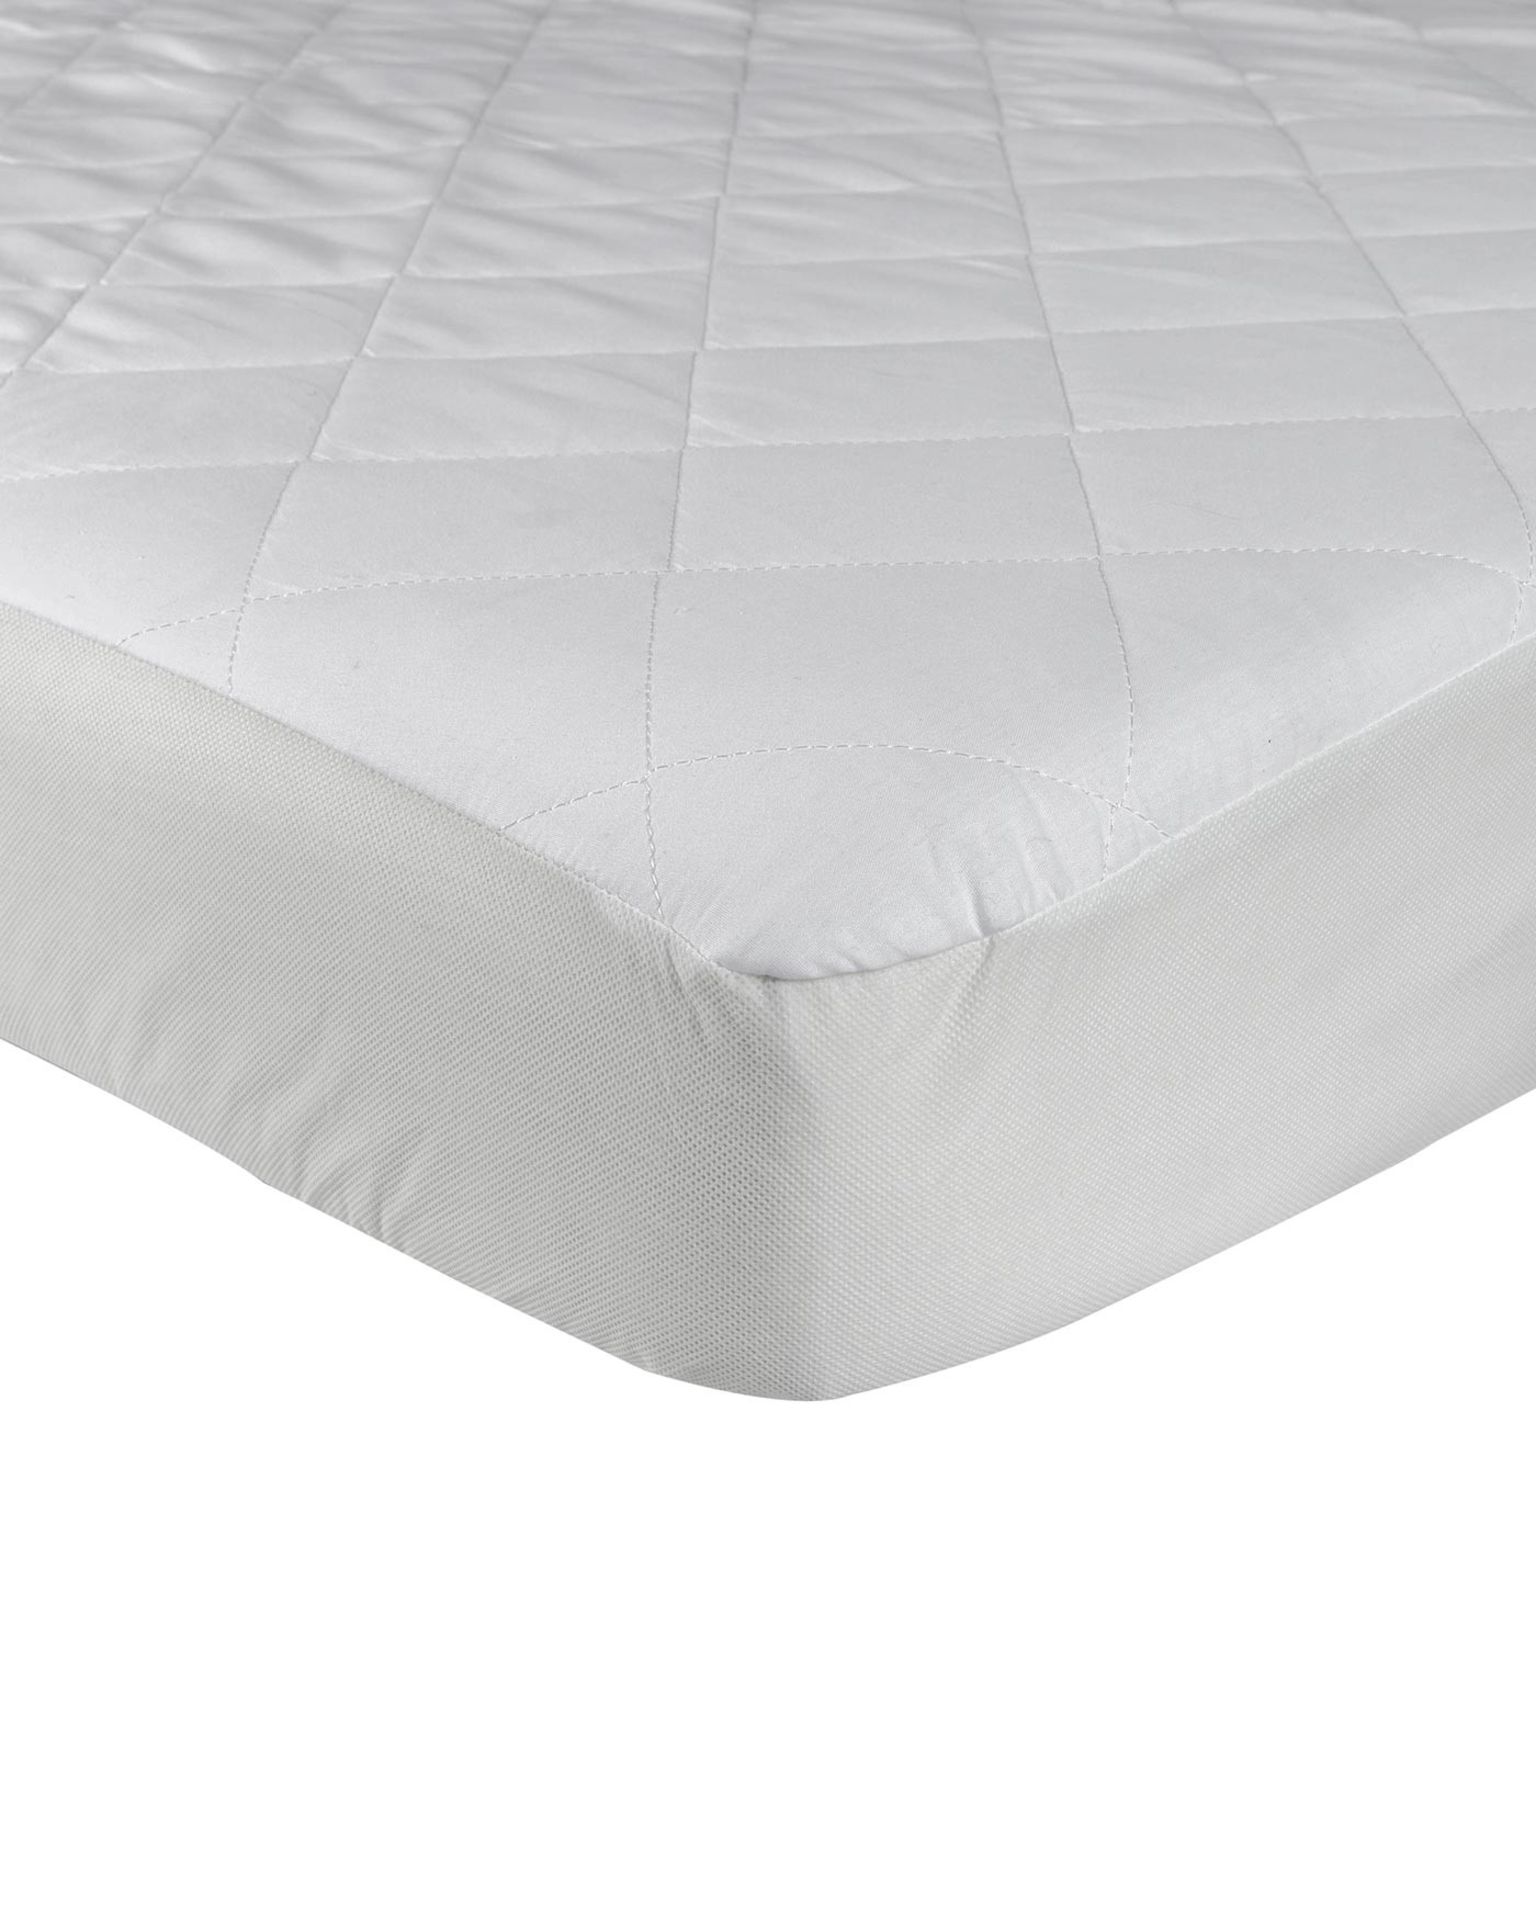 + VAT Brand New Extra Deep Luxury Quilted Fitted Single Bed Mattress Protector 33cm